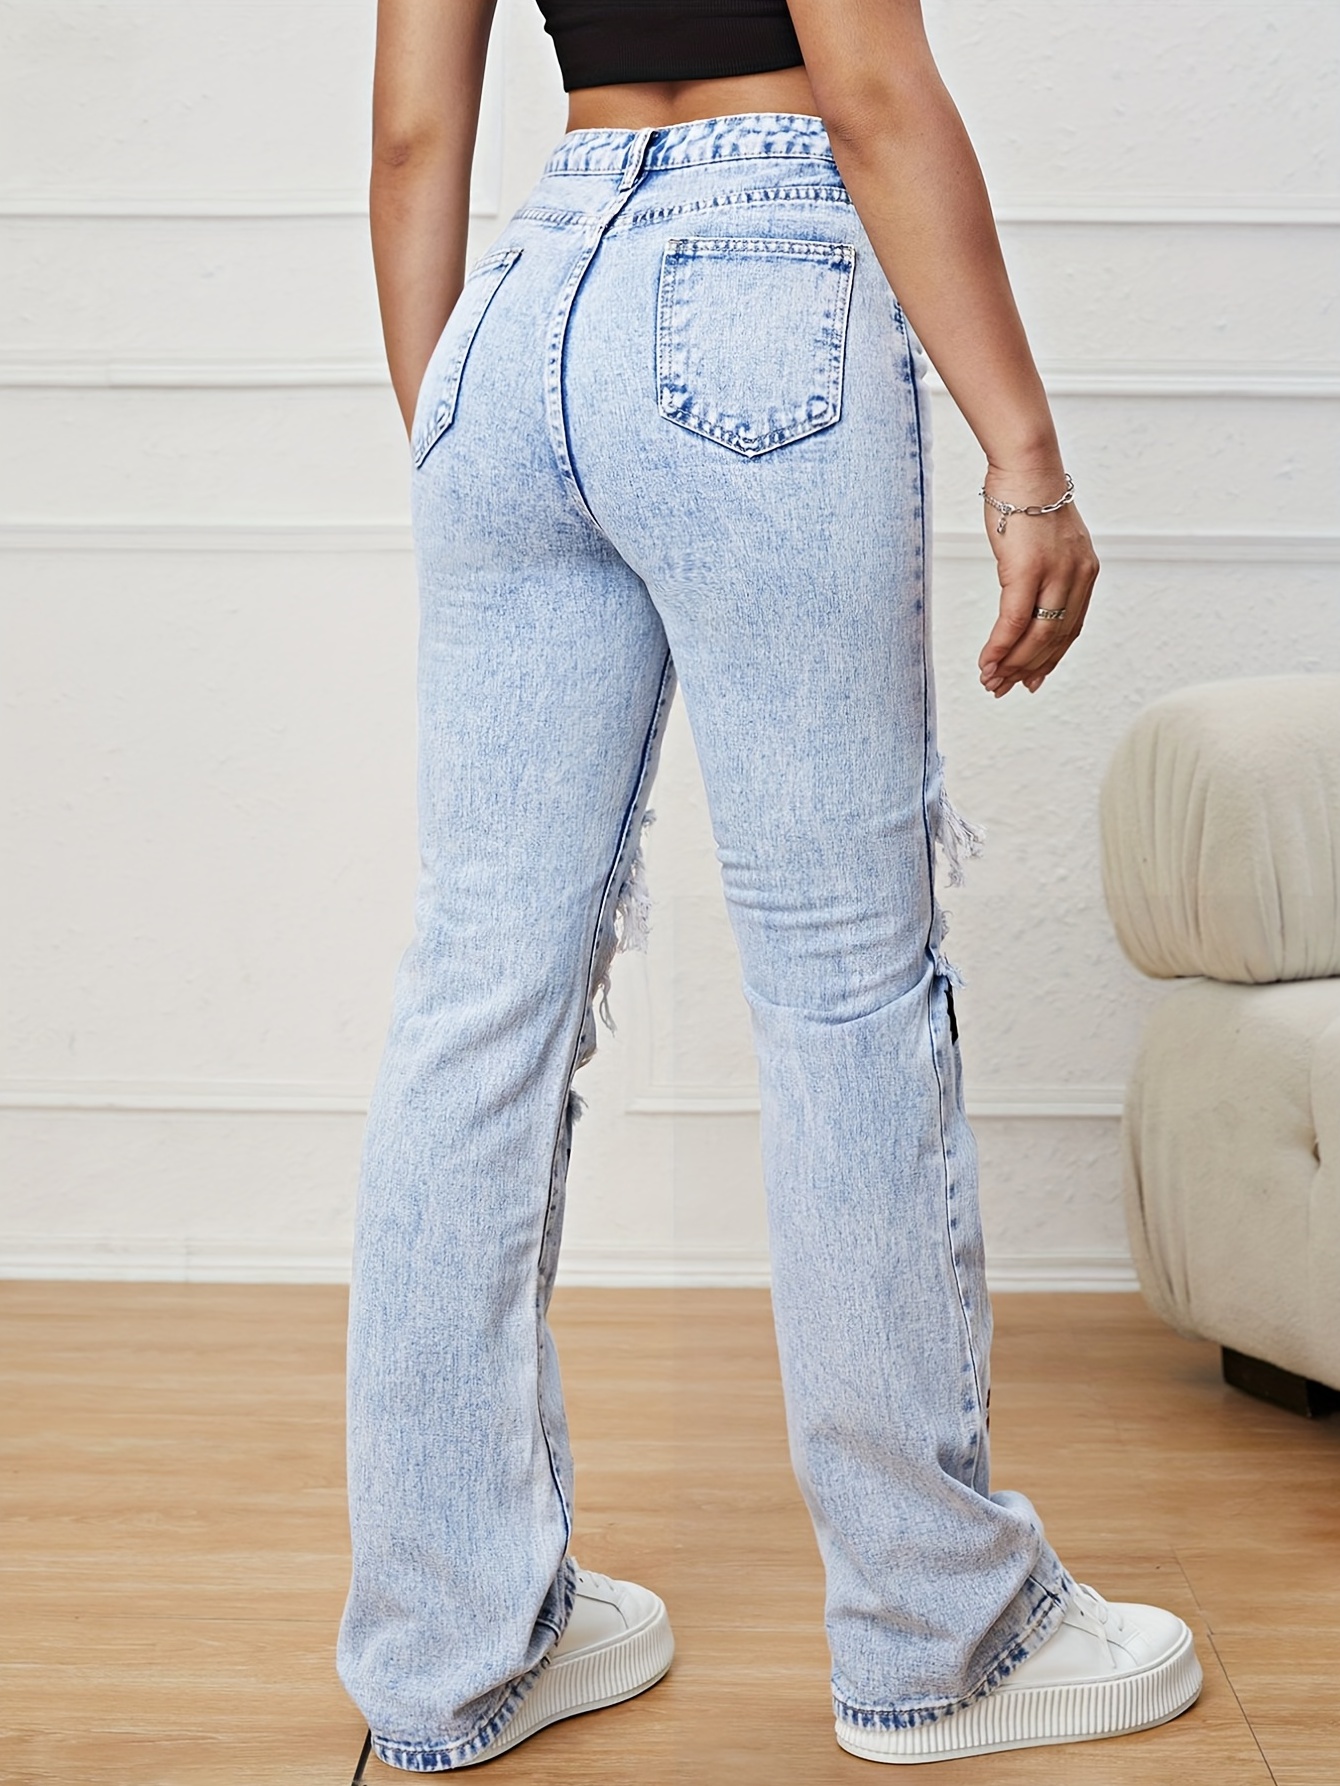 Mardi Gras Outfit for Women Denim Joggers for Women Women's New Street  Printed Perforated Straight Denim Trousers For Carnival Blue 